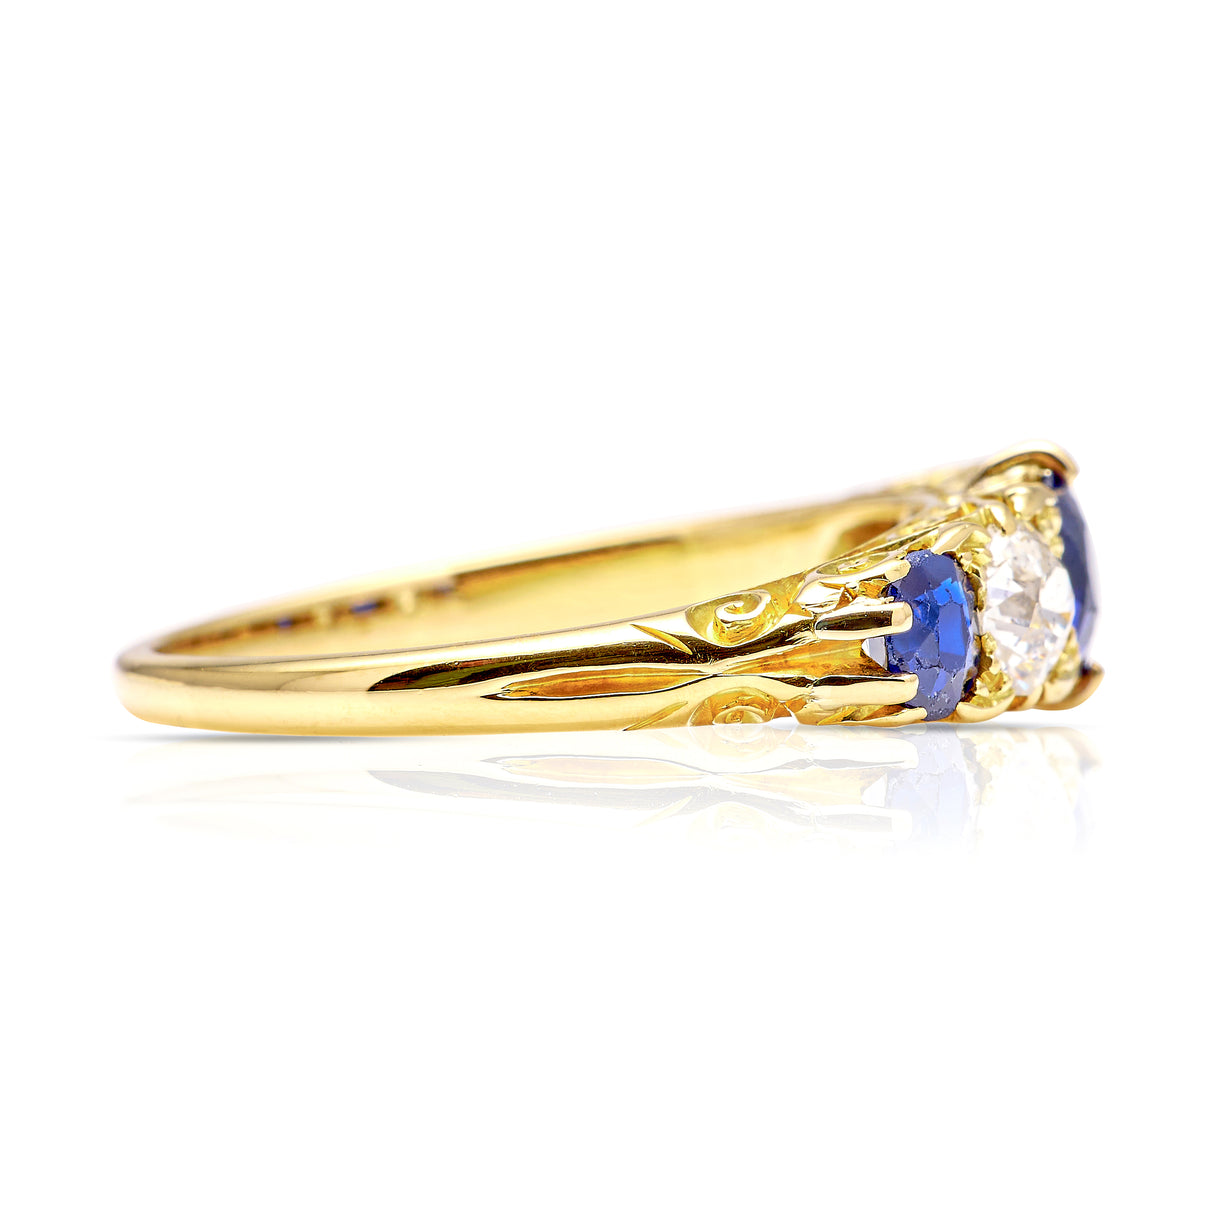 Antique, Edwardian Sapphire and Diamond Five-Stone Ring, 18ct Yellow Gold